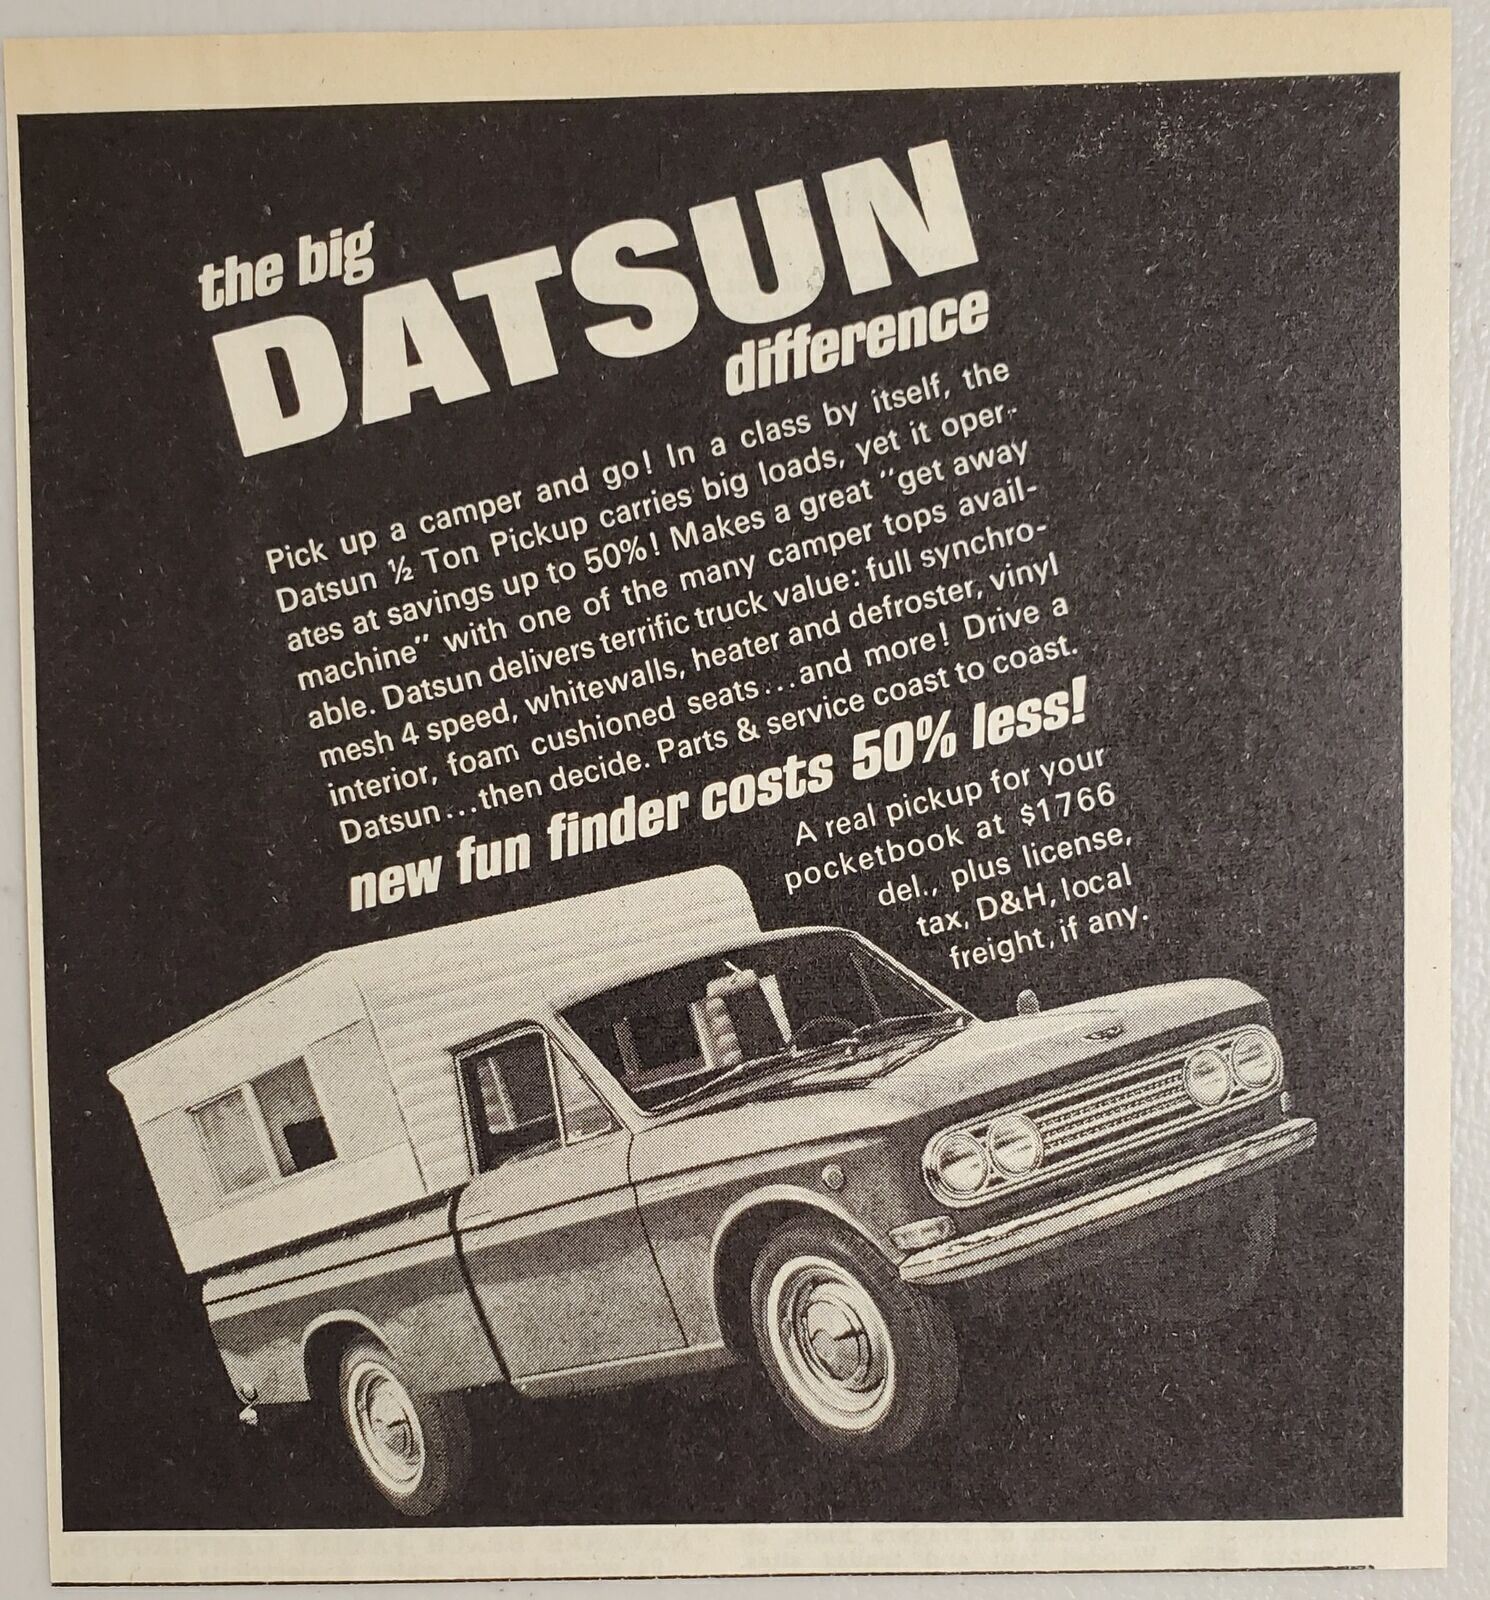 1968 Print Ad Datsun 1/2 Ton Pickup Truck with Camper Costs 50% Less